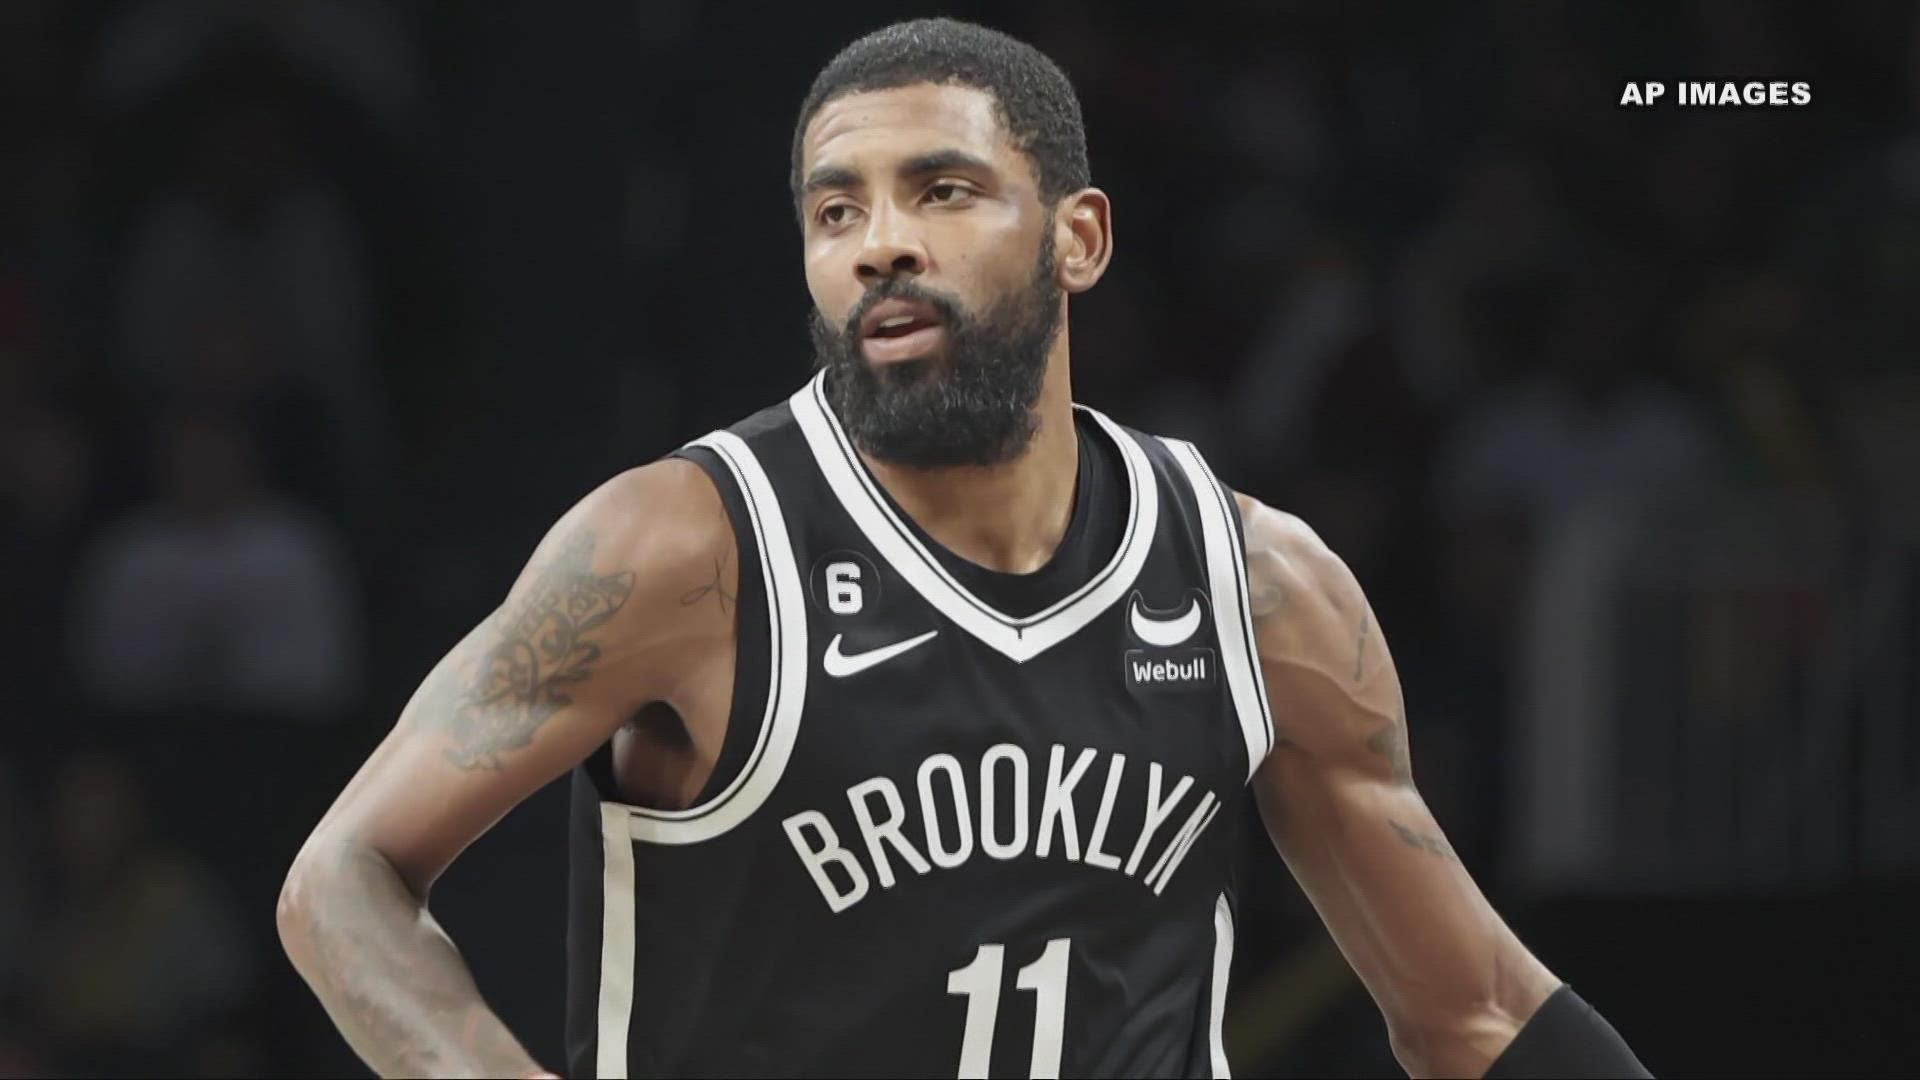 The team said in a statement that after Irving refused to say he had no antisemitic beliefs, he is "currently unfit to be associated with the Brooklyn Nets.”